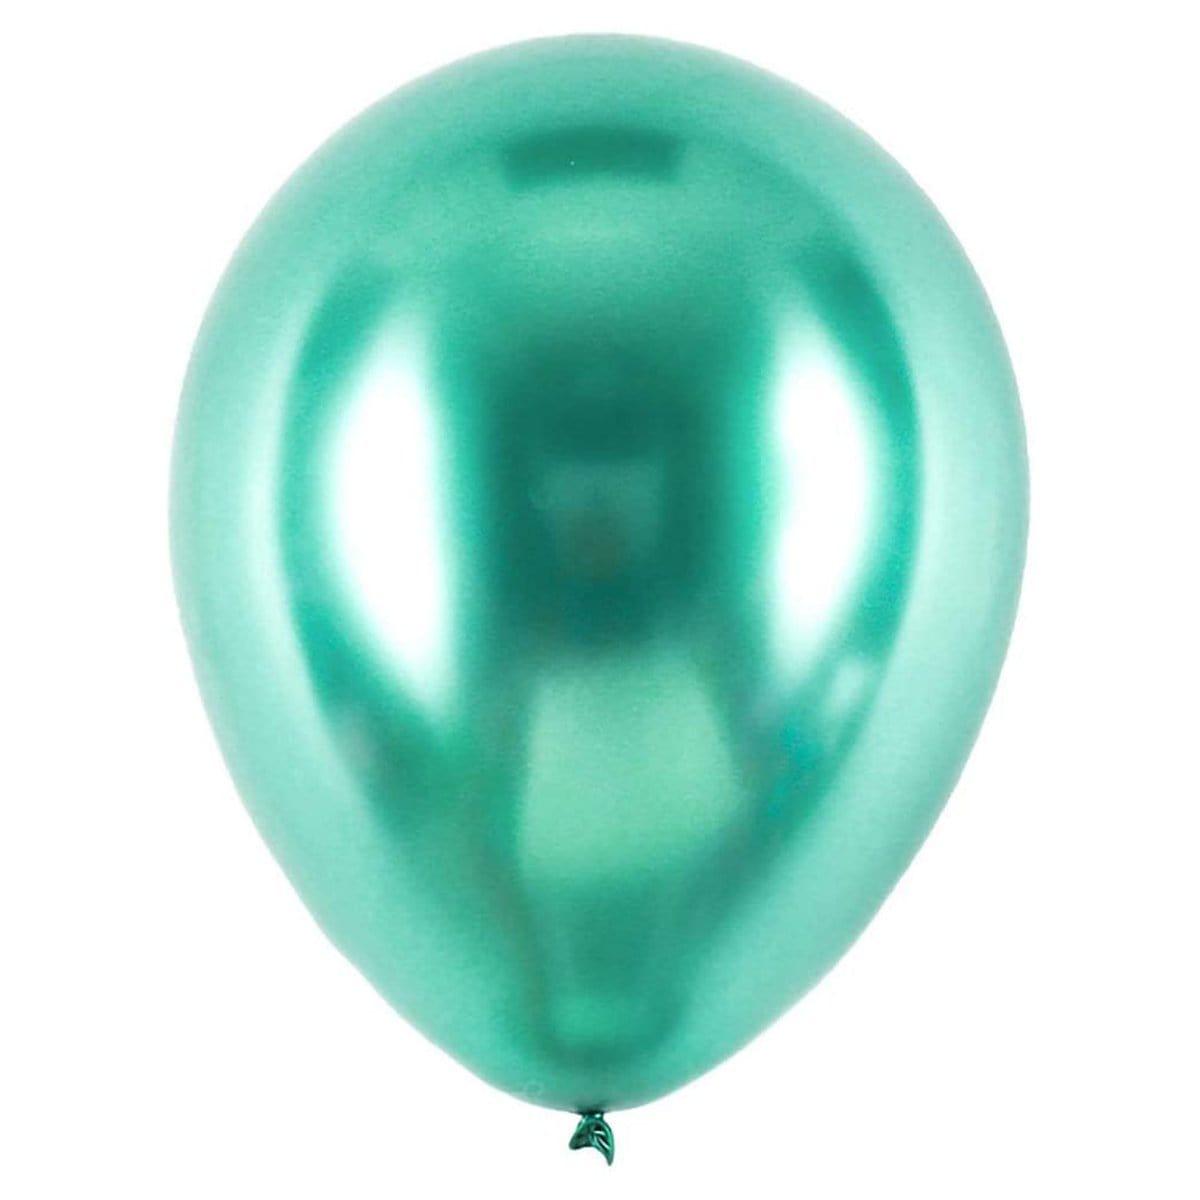 Buy Balloons Green Latex Balloon 5 Inches, Chrome Collection, 100 Count sold at Party Expert